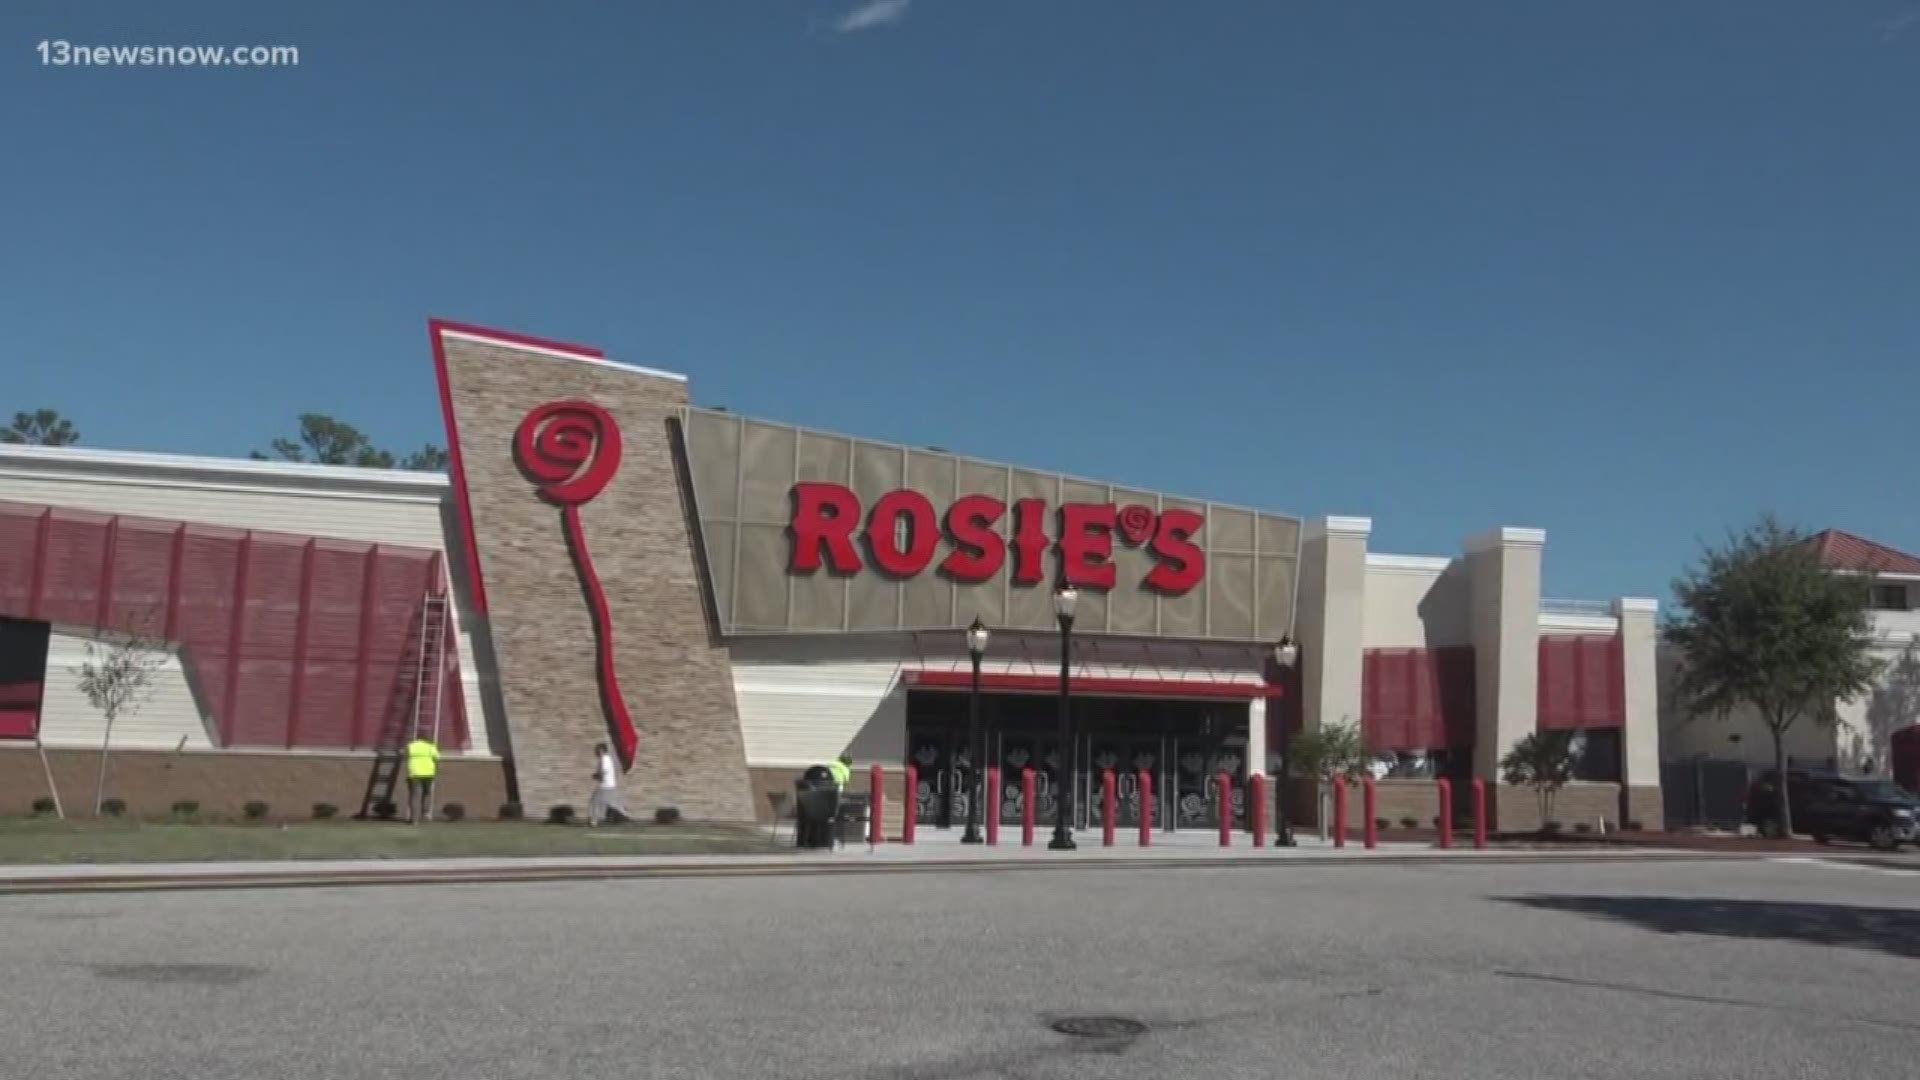 Get ready to place your bets! Here's a first look at Rosie's Gaming Emporium in Hampton. It's just about ready to open and people are excited to save time on travel.